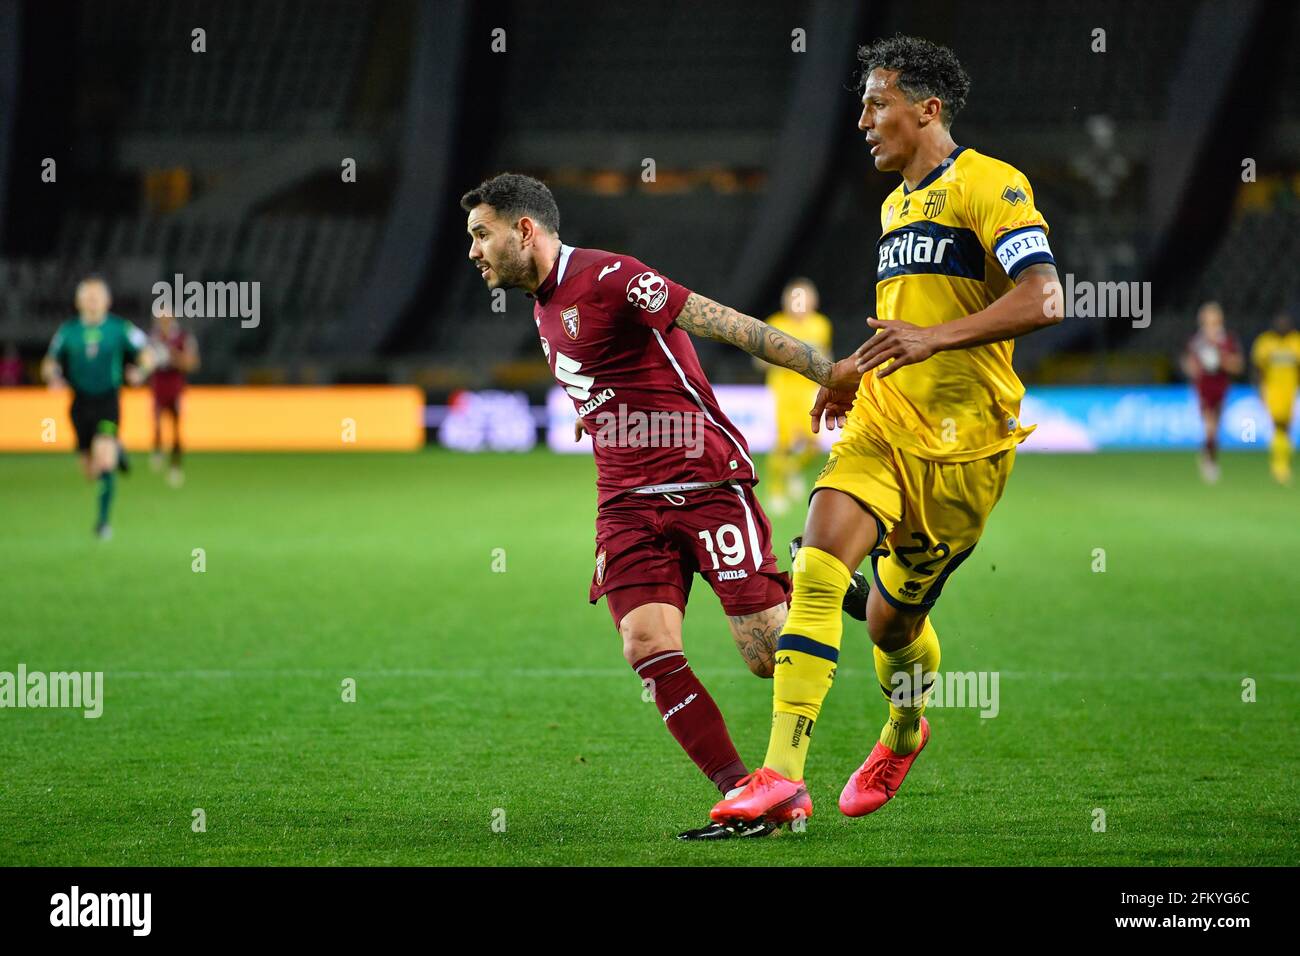 Turin, Italy. 3rd, May 2021. Antonio Sanabria (19) of Torino FC and Bruno Alves (22) of Parma Calcio seen during the Serie A match between Torino FC and Parma Calcio at Stadio Grande Torino in Turin, Italy. (Photo credit: Gonzales Photo - Tommaso Fimiano). Stock Photo